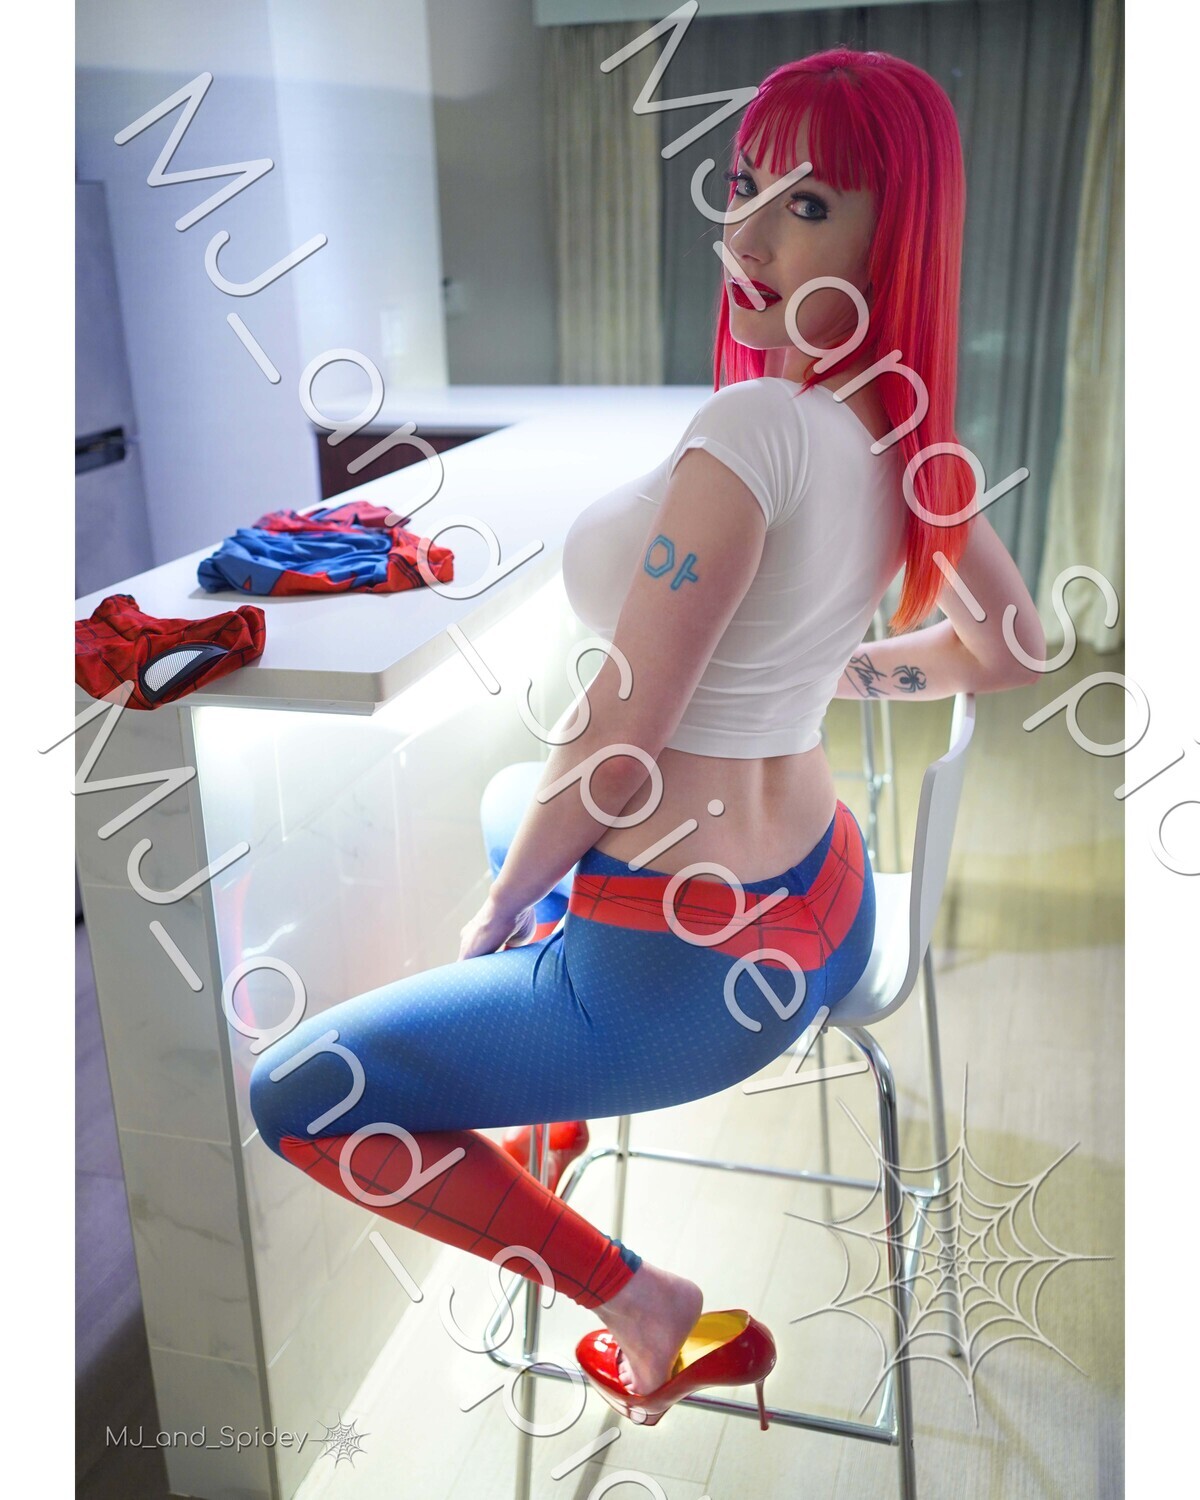 Marvel - Spider-Man - Mary Jane Watson - Leggings 1 - Digital Cosplay Image (@MJ_and_Spidey, MJ and Spidey, Comics)